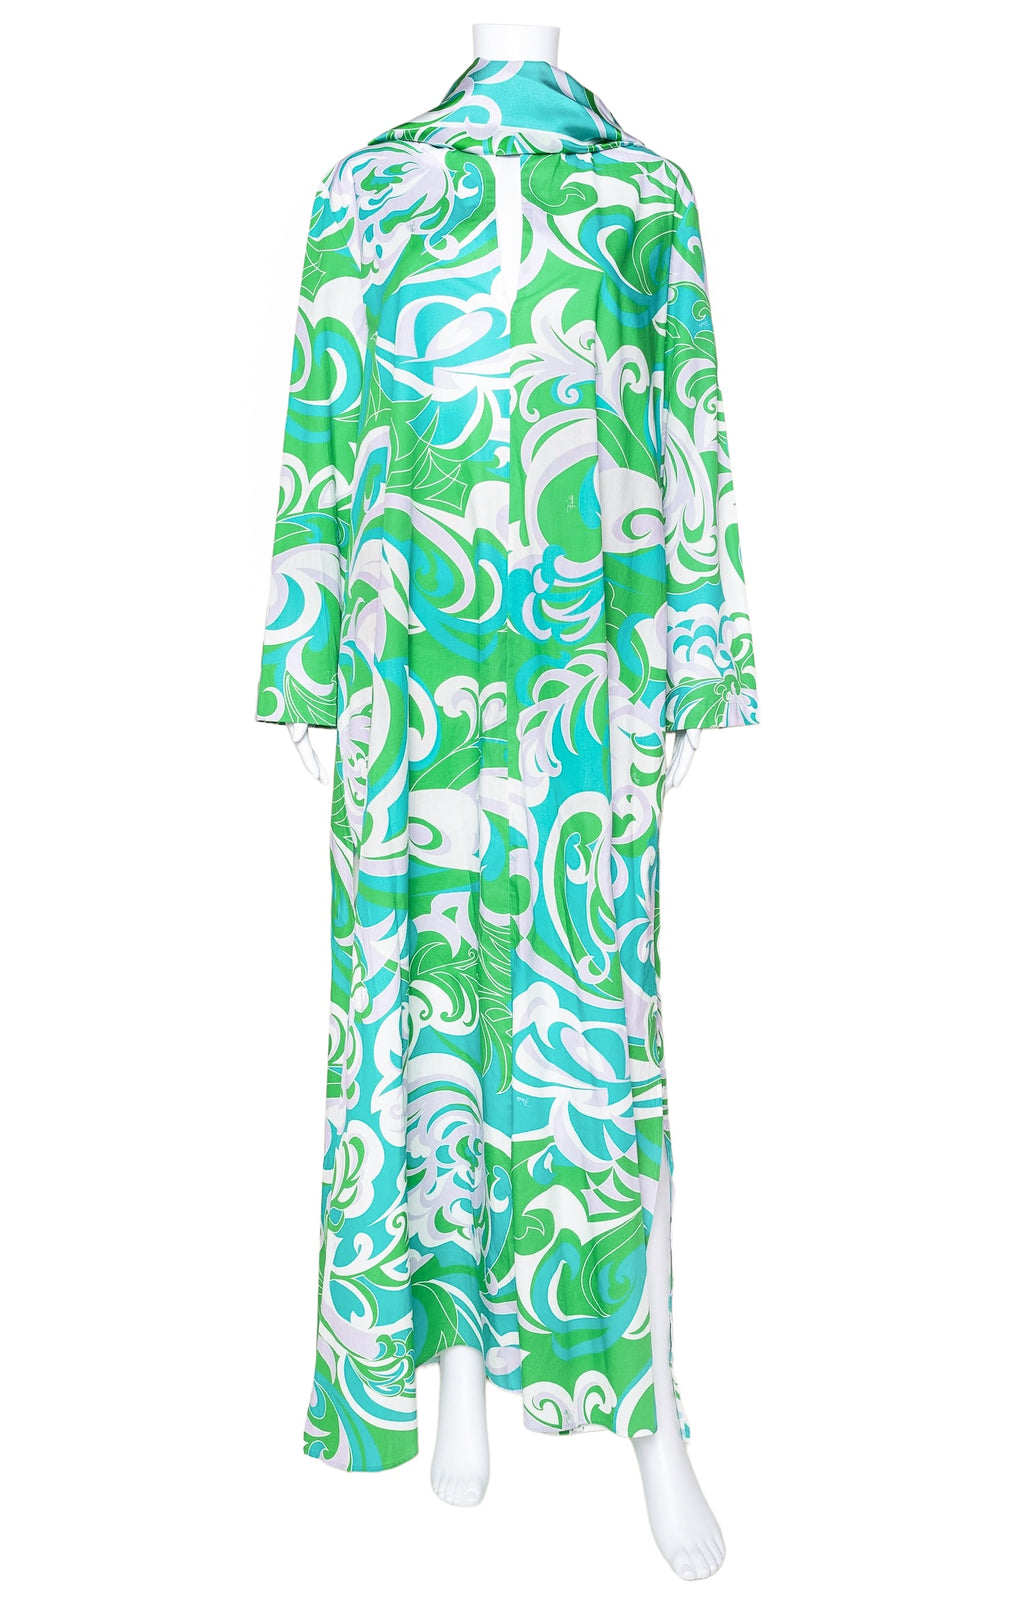 EMILIO PUCCI SUSTAINABLE (RARE & NEW) with tags Dress & Scarf Size: Dress - Marked a US 6 but fits like OSFM Scarf - 34.5" x 34.5"